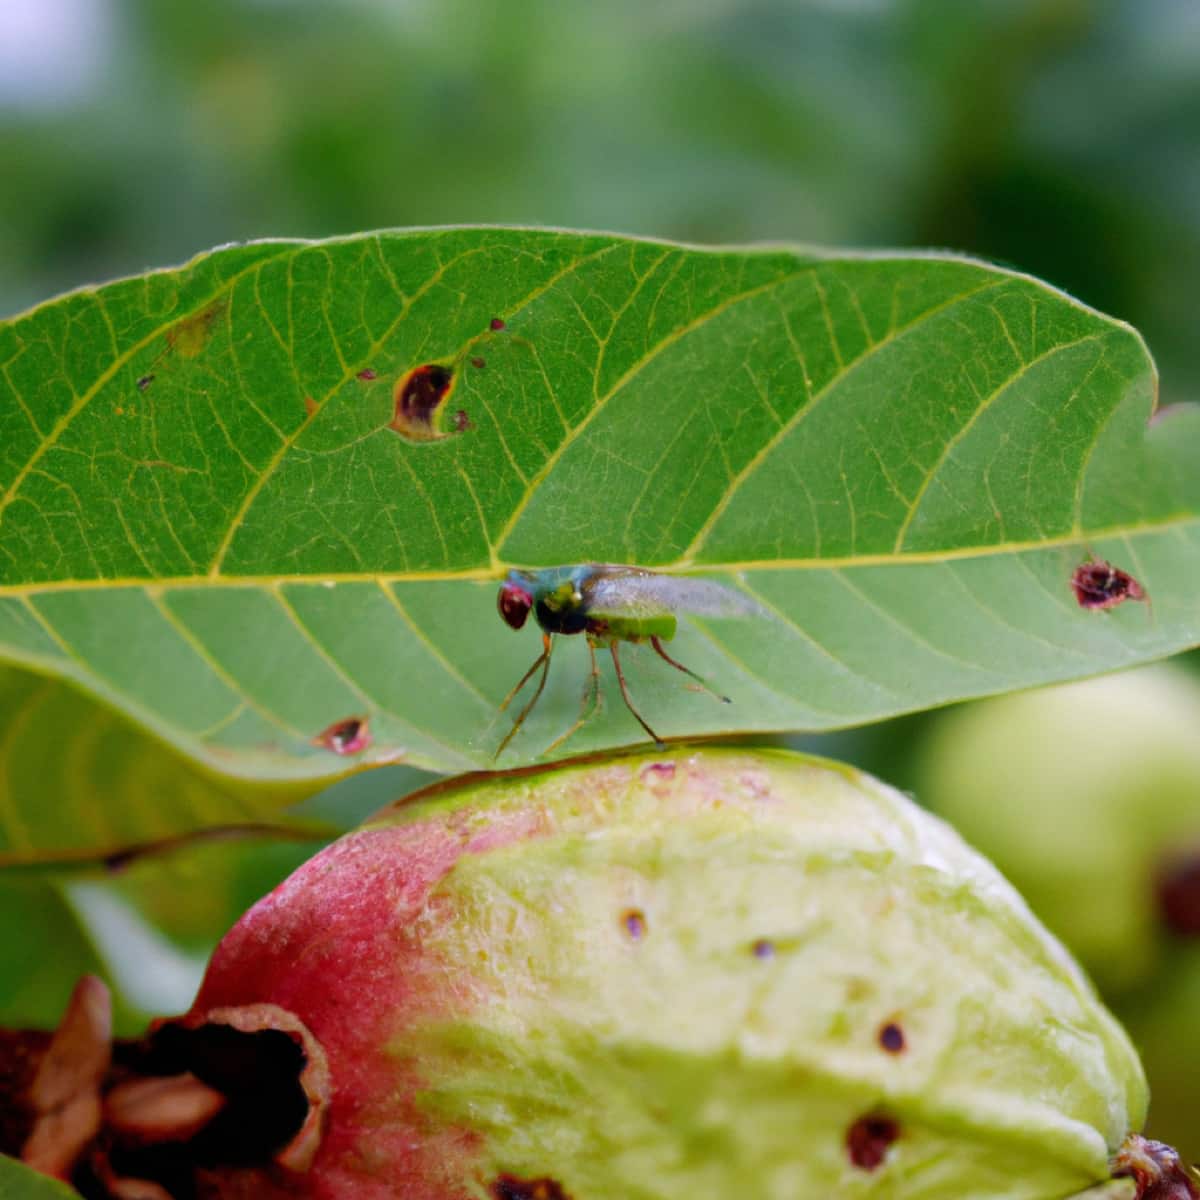 Key Rules to Get Rid of Fruit Fly in Guava